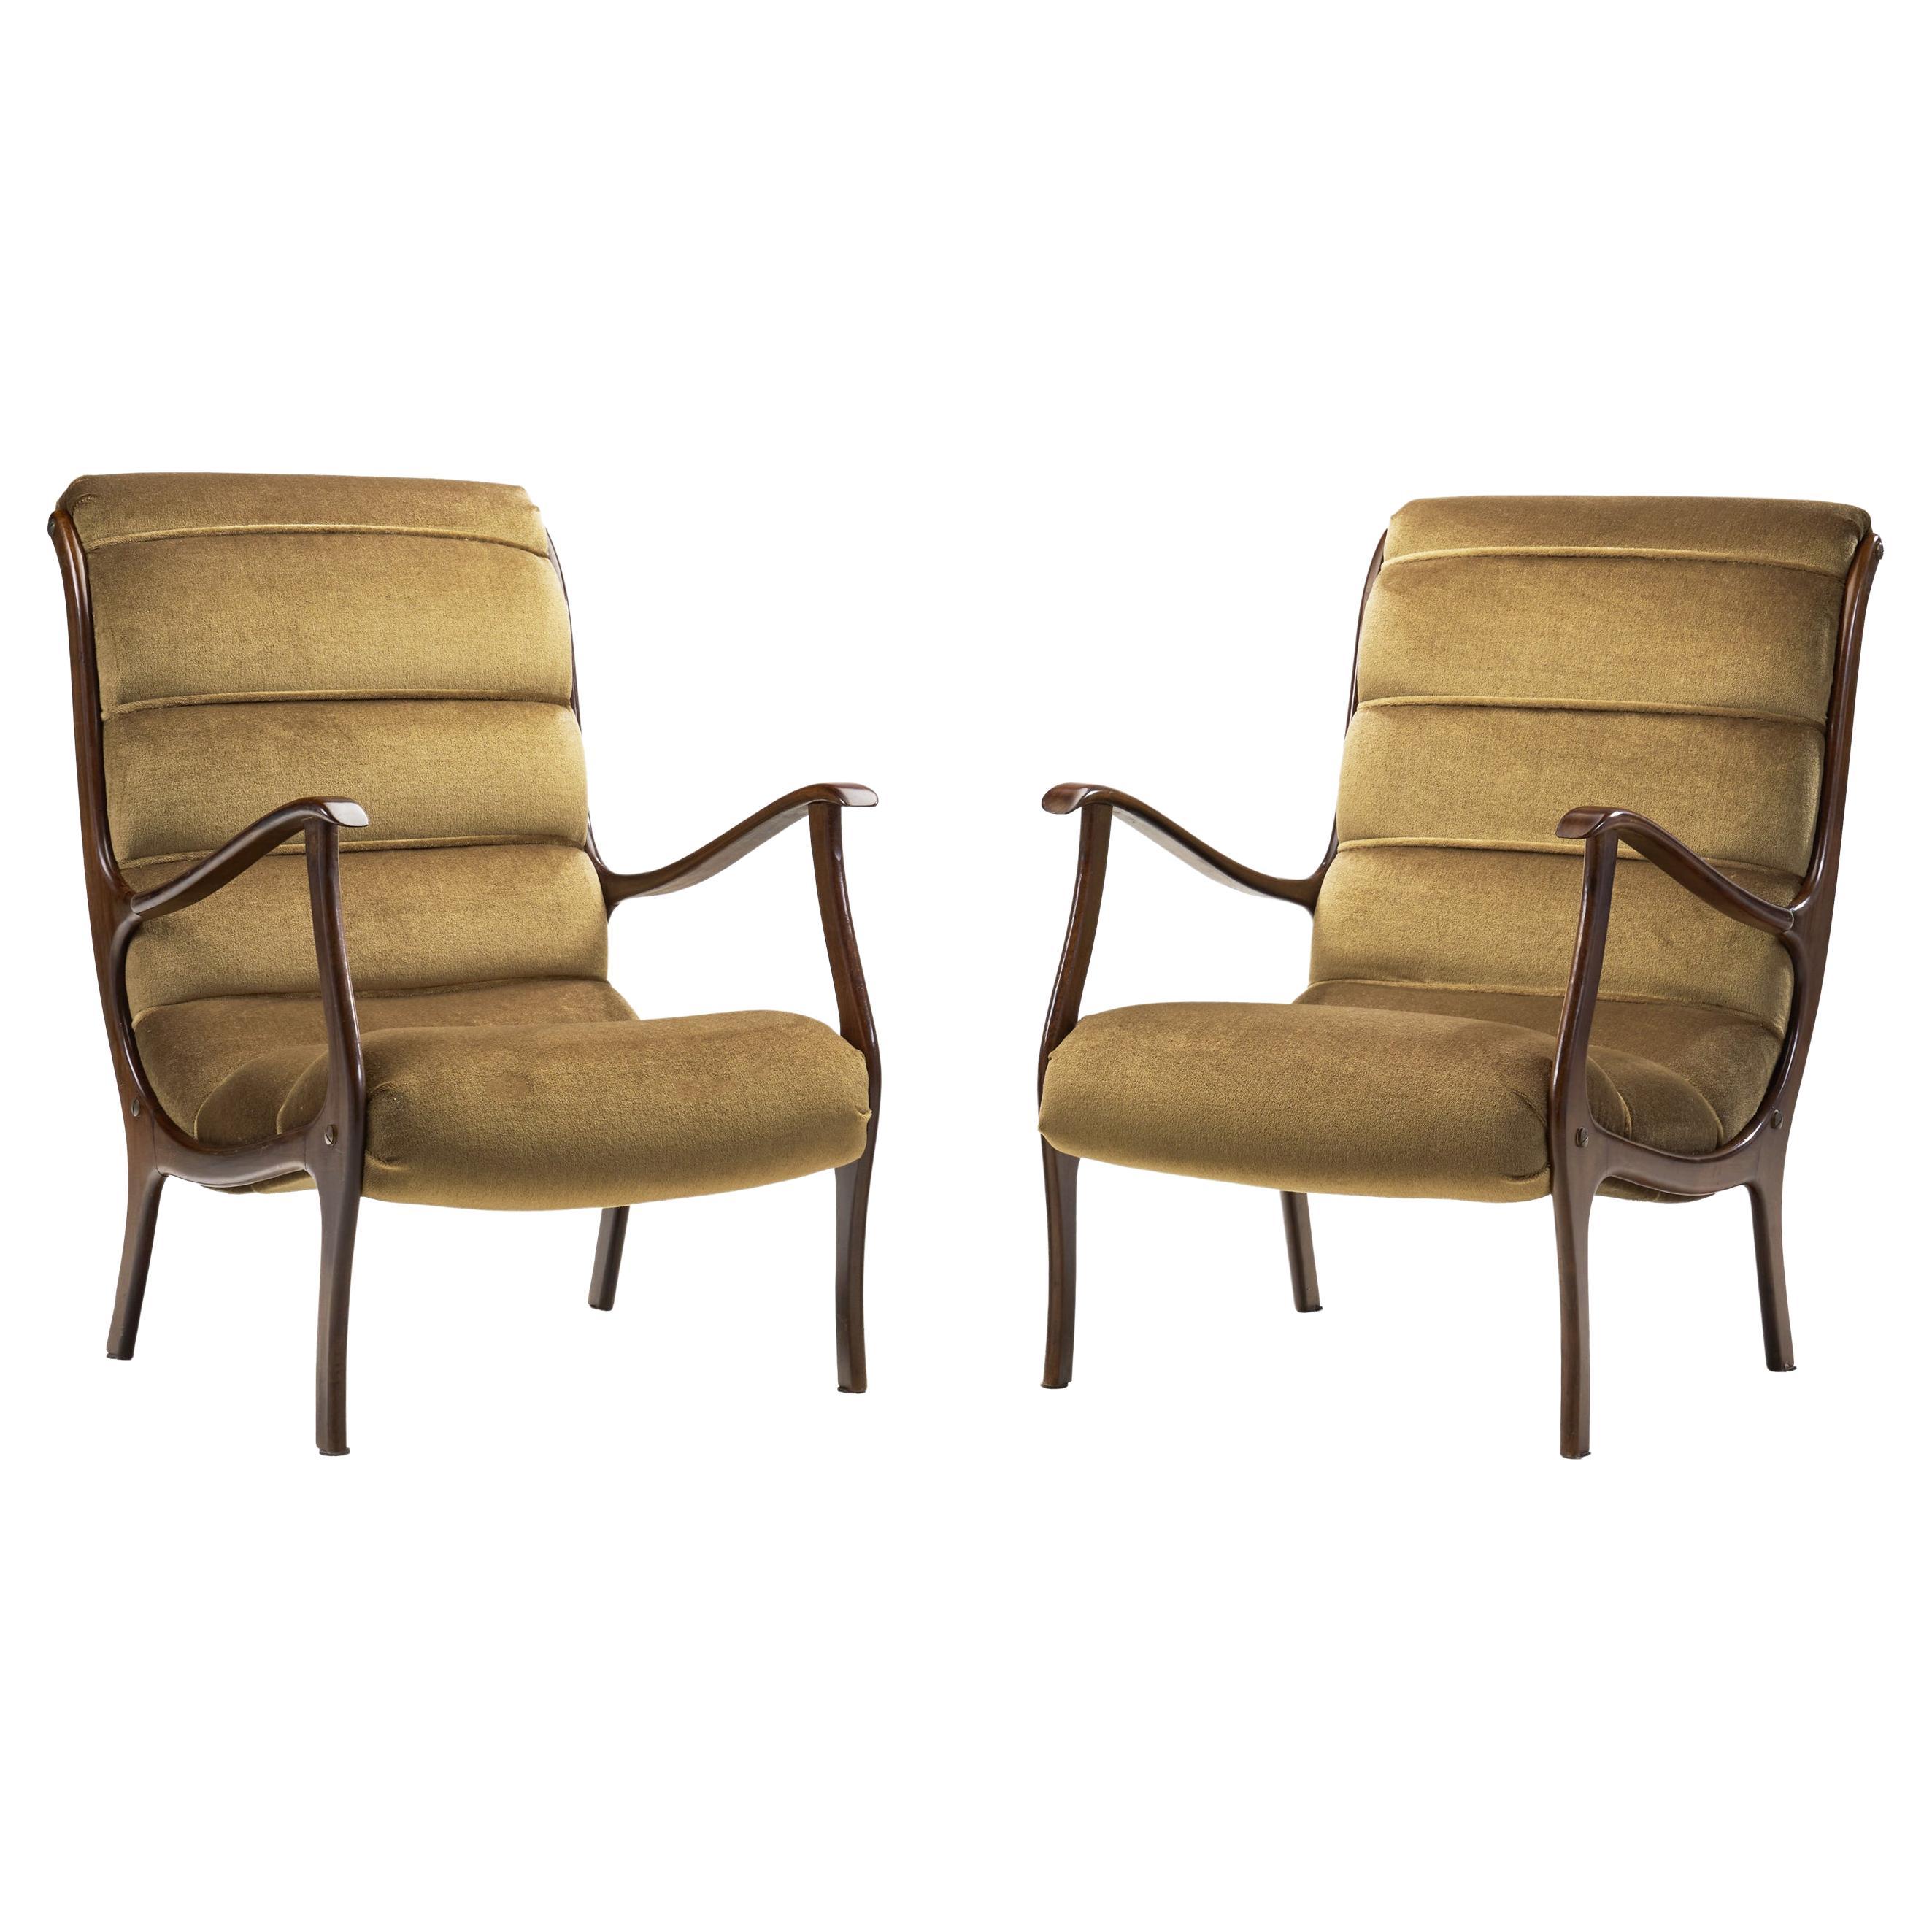 Ezio Longhi Pair of Ribbed-Back Lounge Chairs for ELAM, Italy, 1960s For Sale